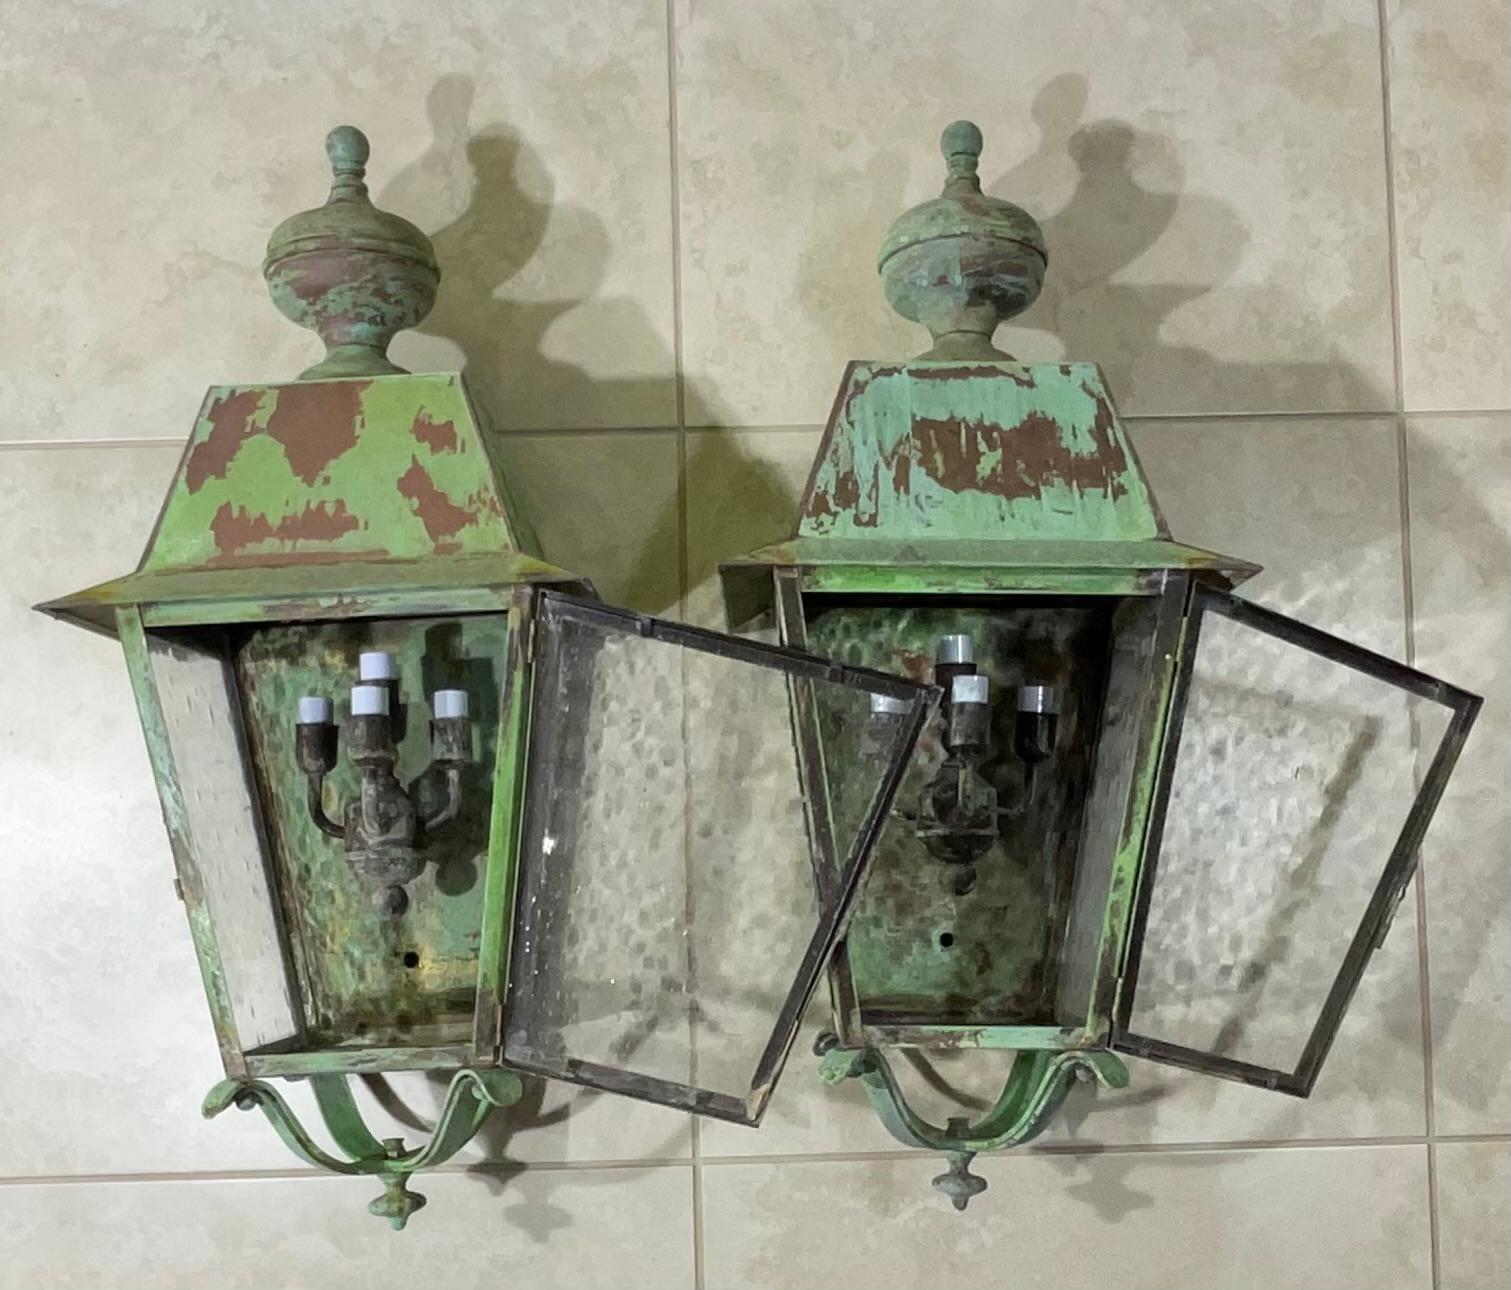 Beautiful pair of wall lantern, seeded glass, made of solid brass beautiful patina, with four 40/watt lights each lantern, suitable for wet location, great oxidization,
Decorative pair.